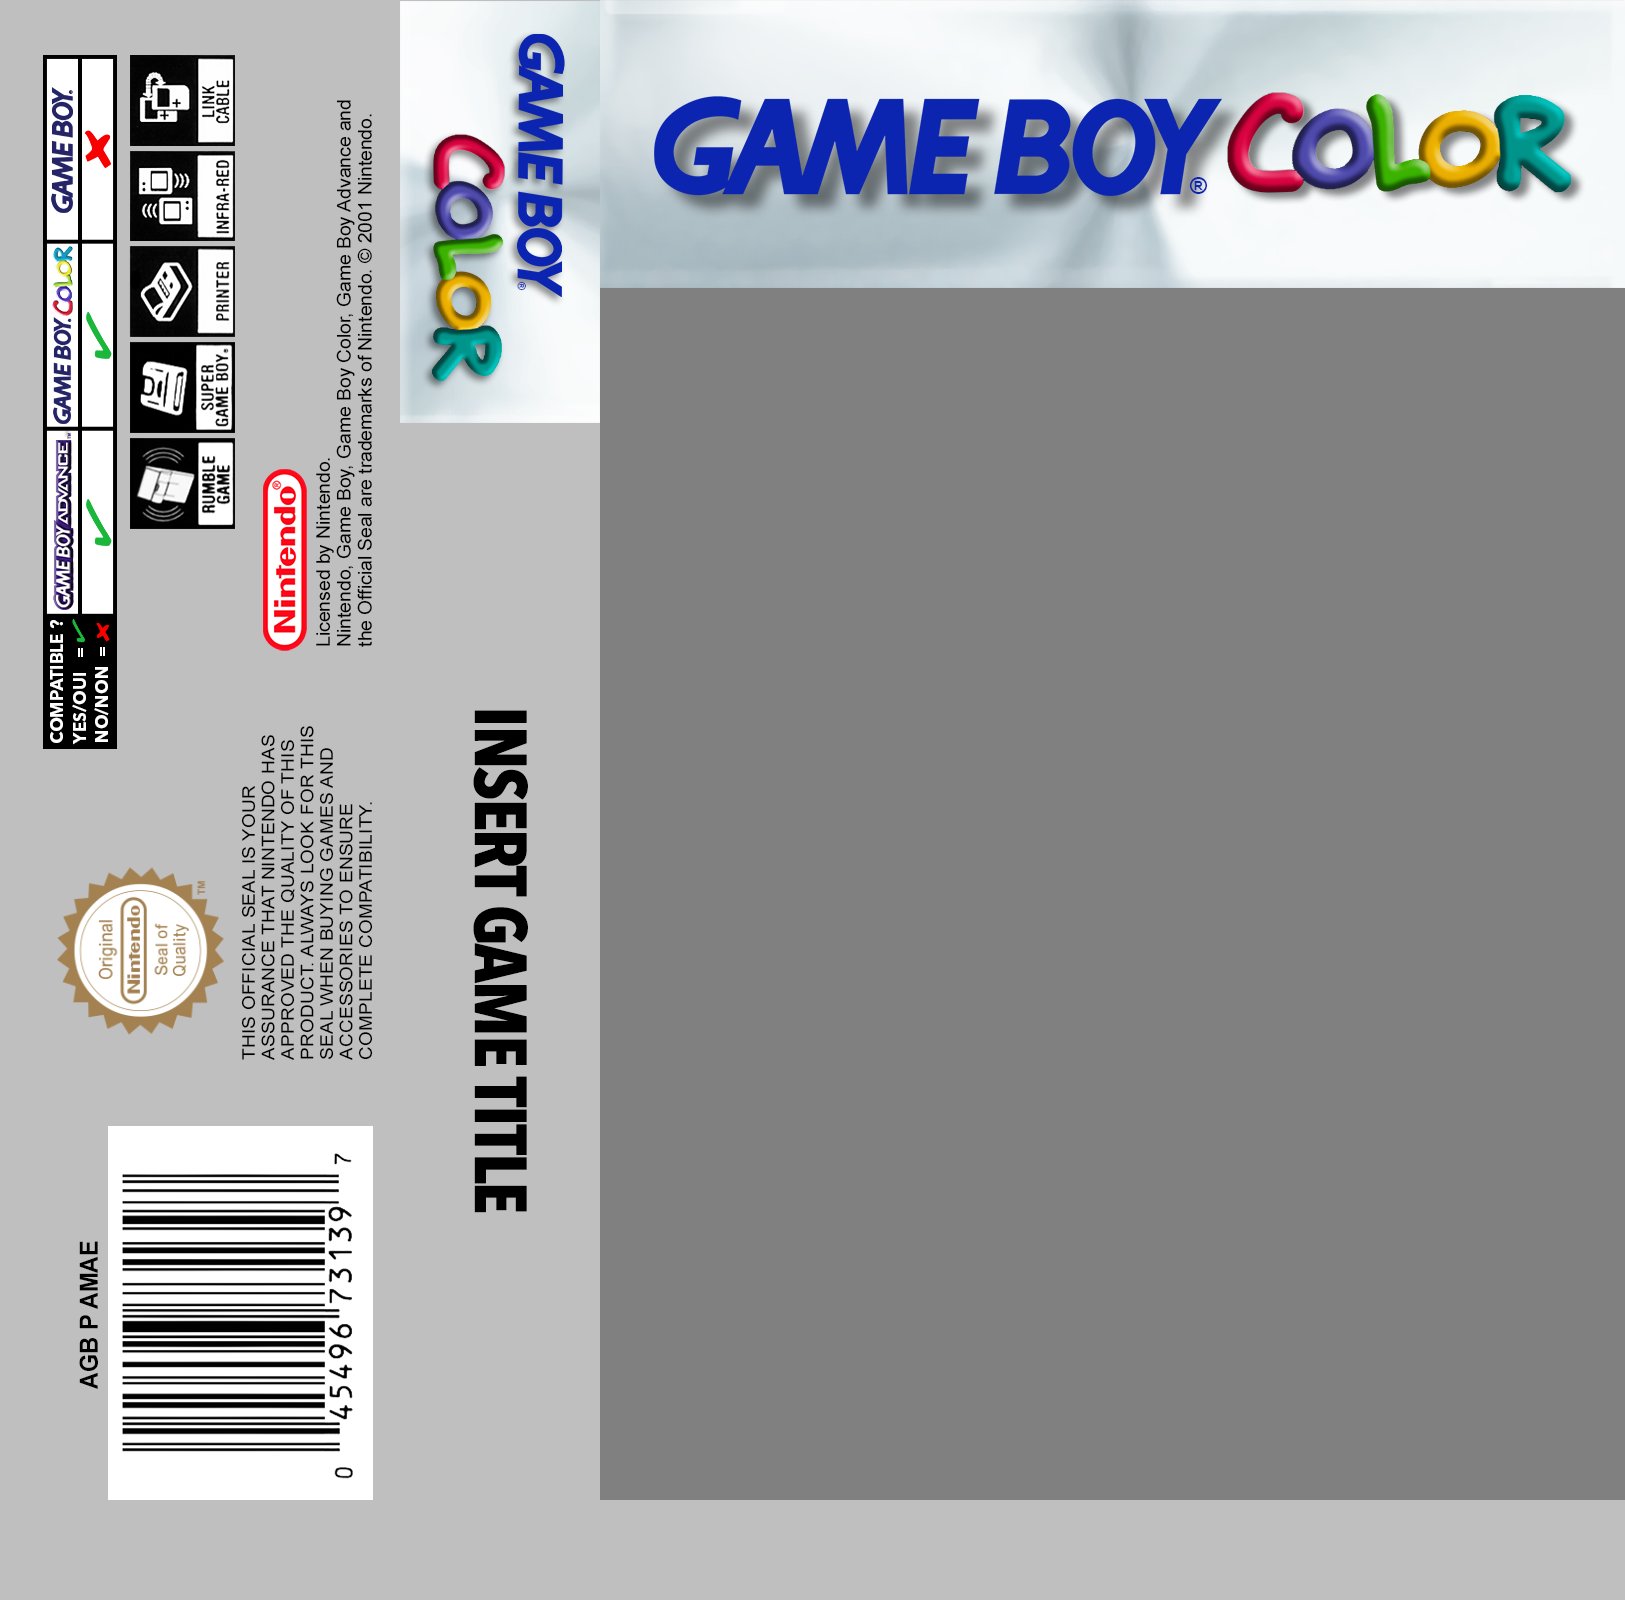 WumpaGem on Twitter: "So I'm pretty much done making my own cover templates for Game Boy games stored in audio cassette cases. If anyone is interested, provide Google Drive links to